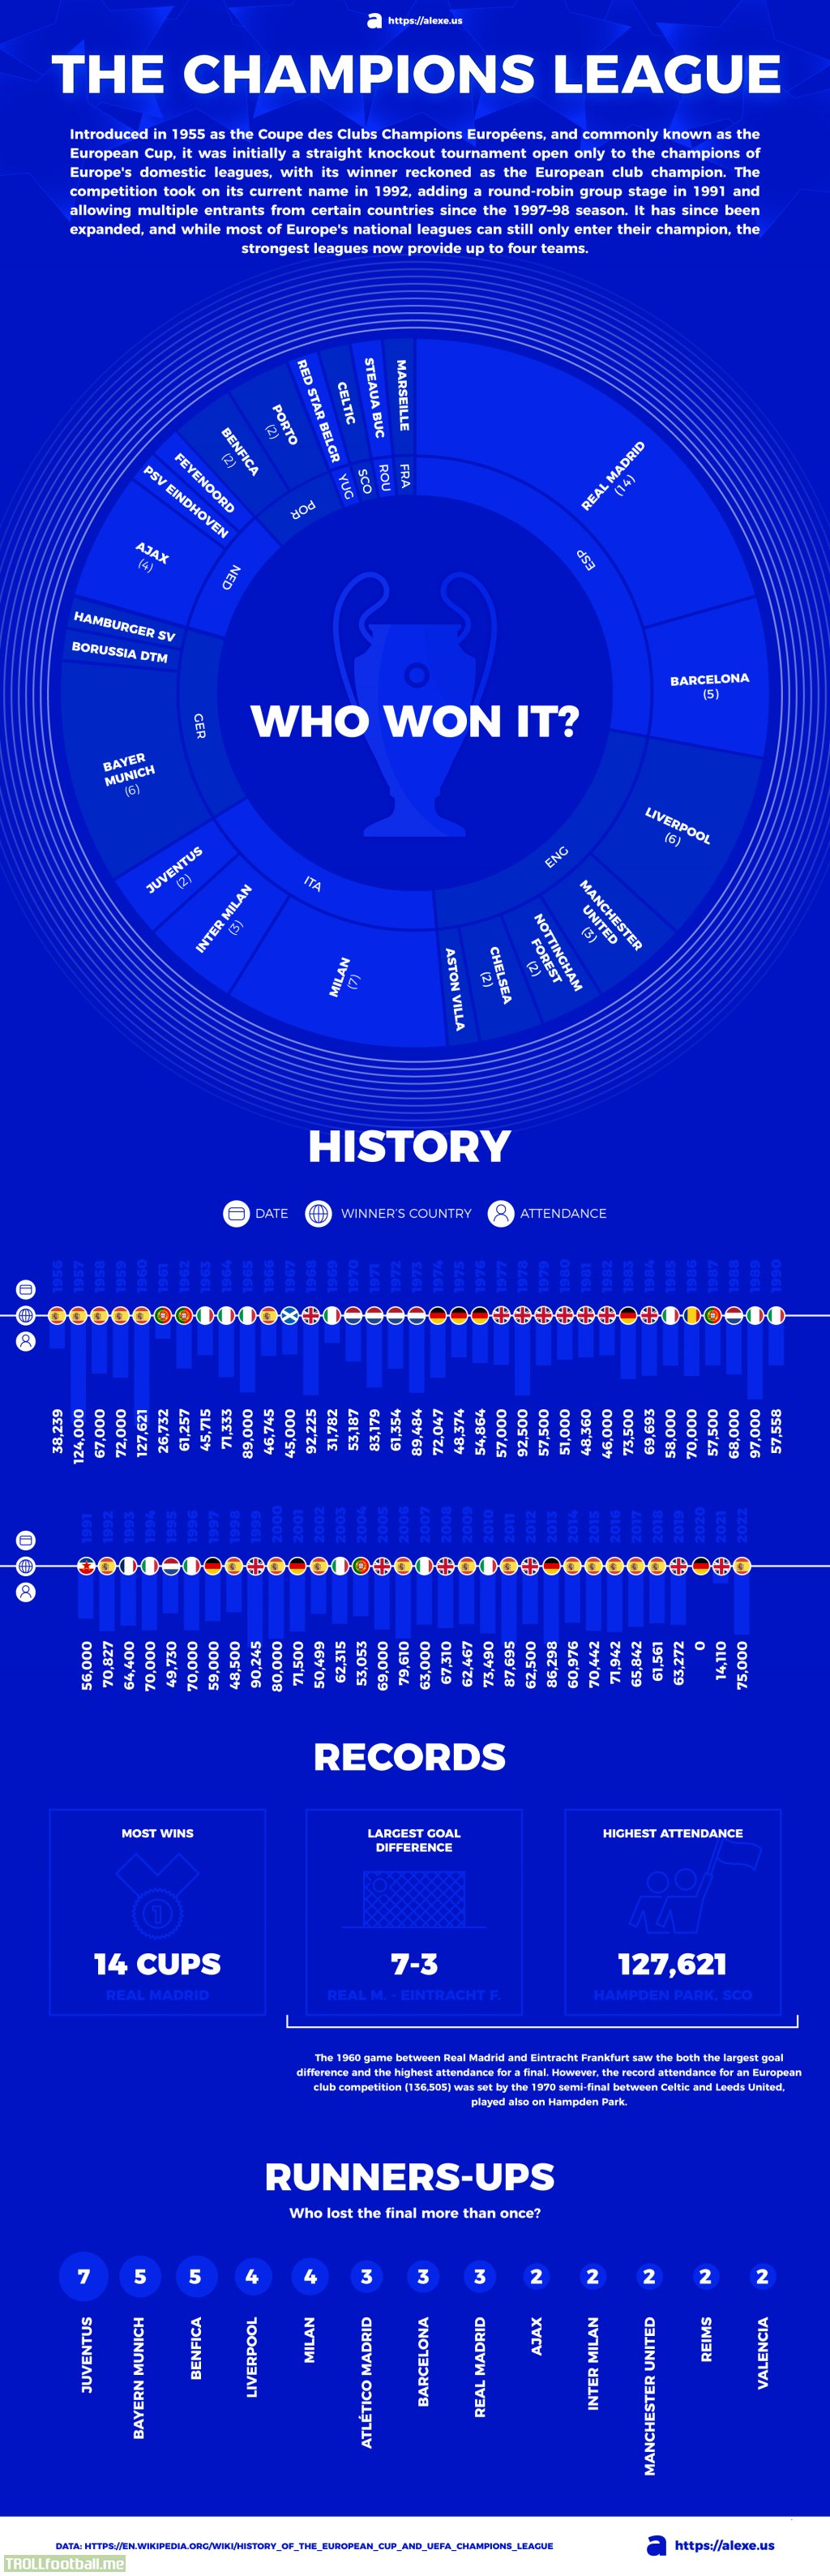 All the champions league finals in a single graph!